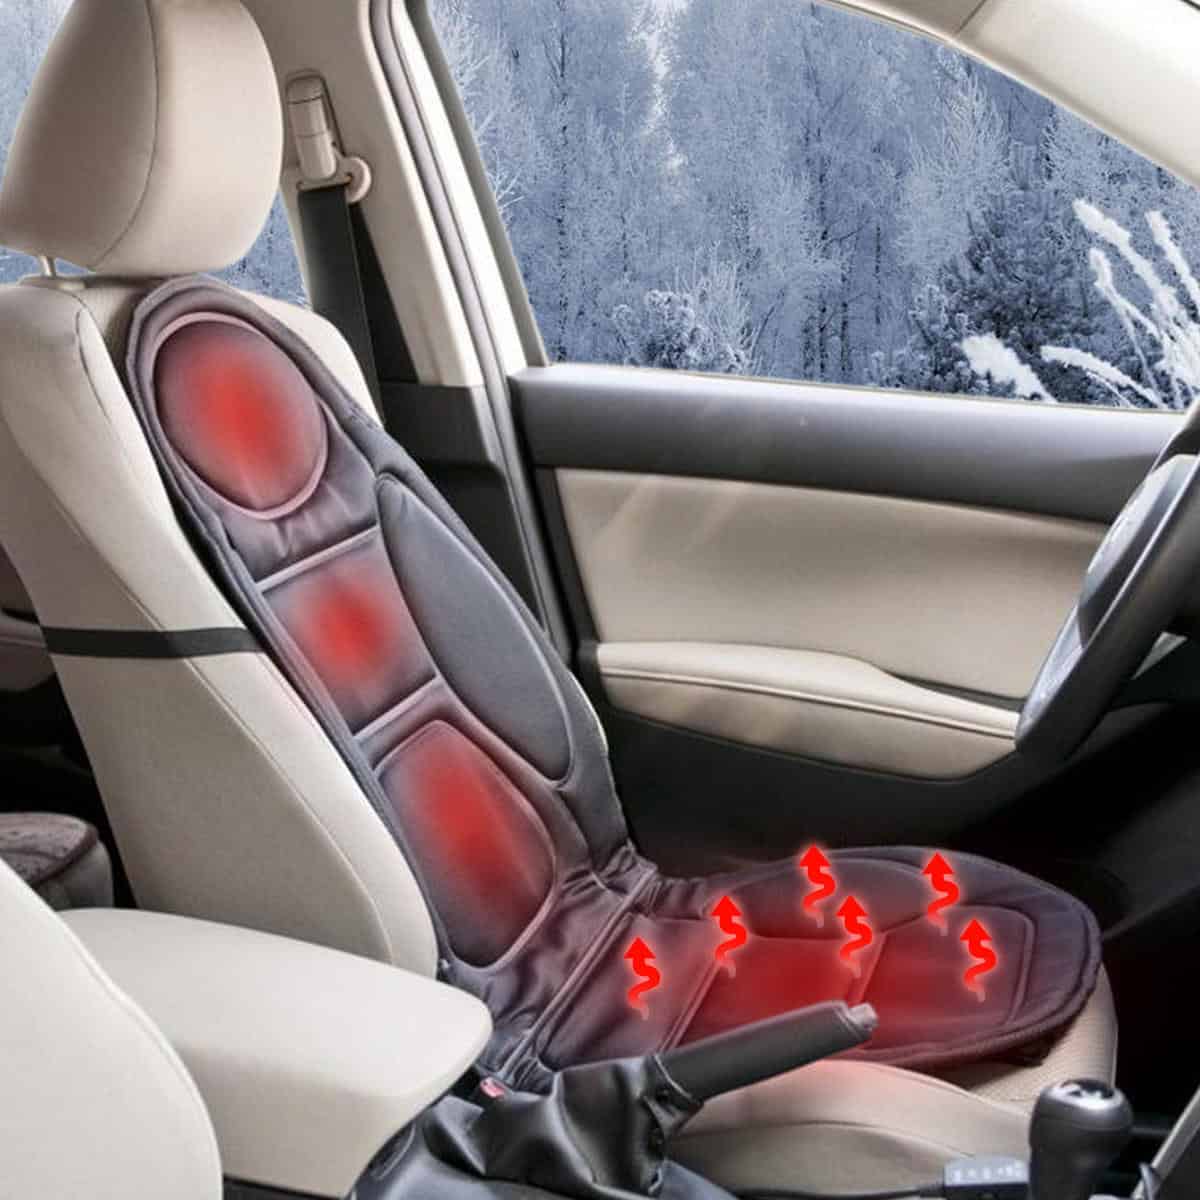 Best Heated Car Seat Covers (Review and Buying Guide) - Buyers Guides